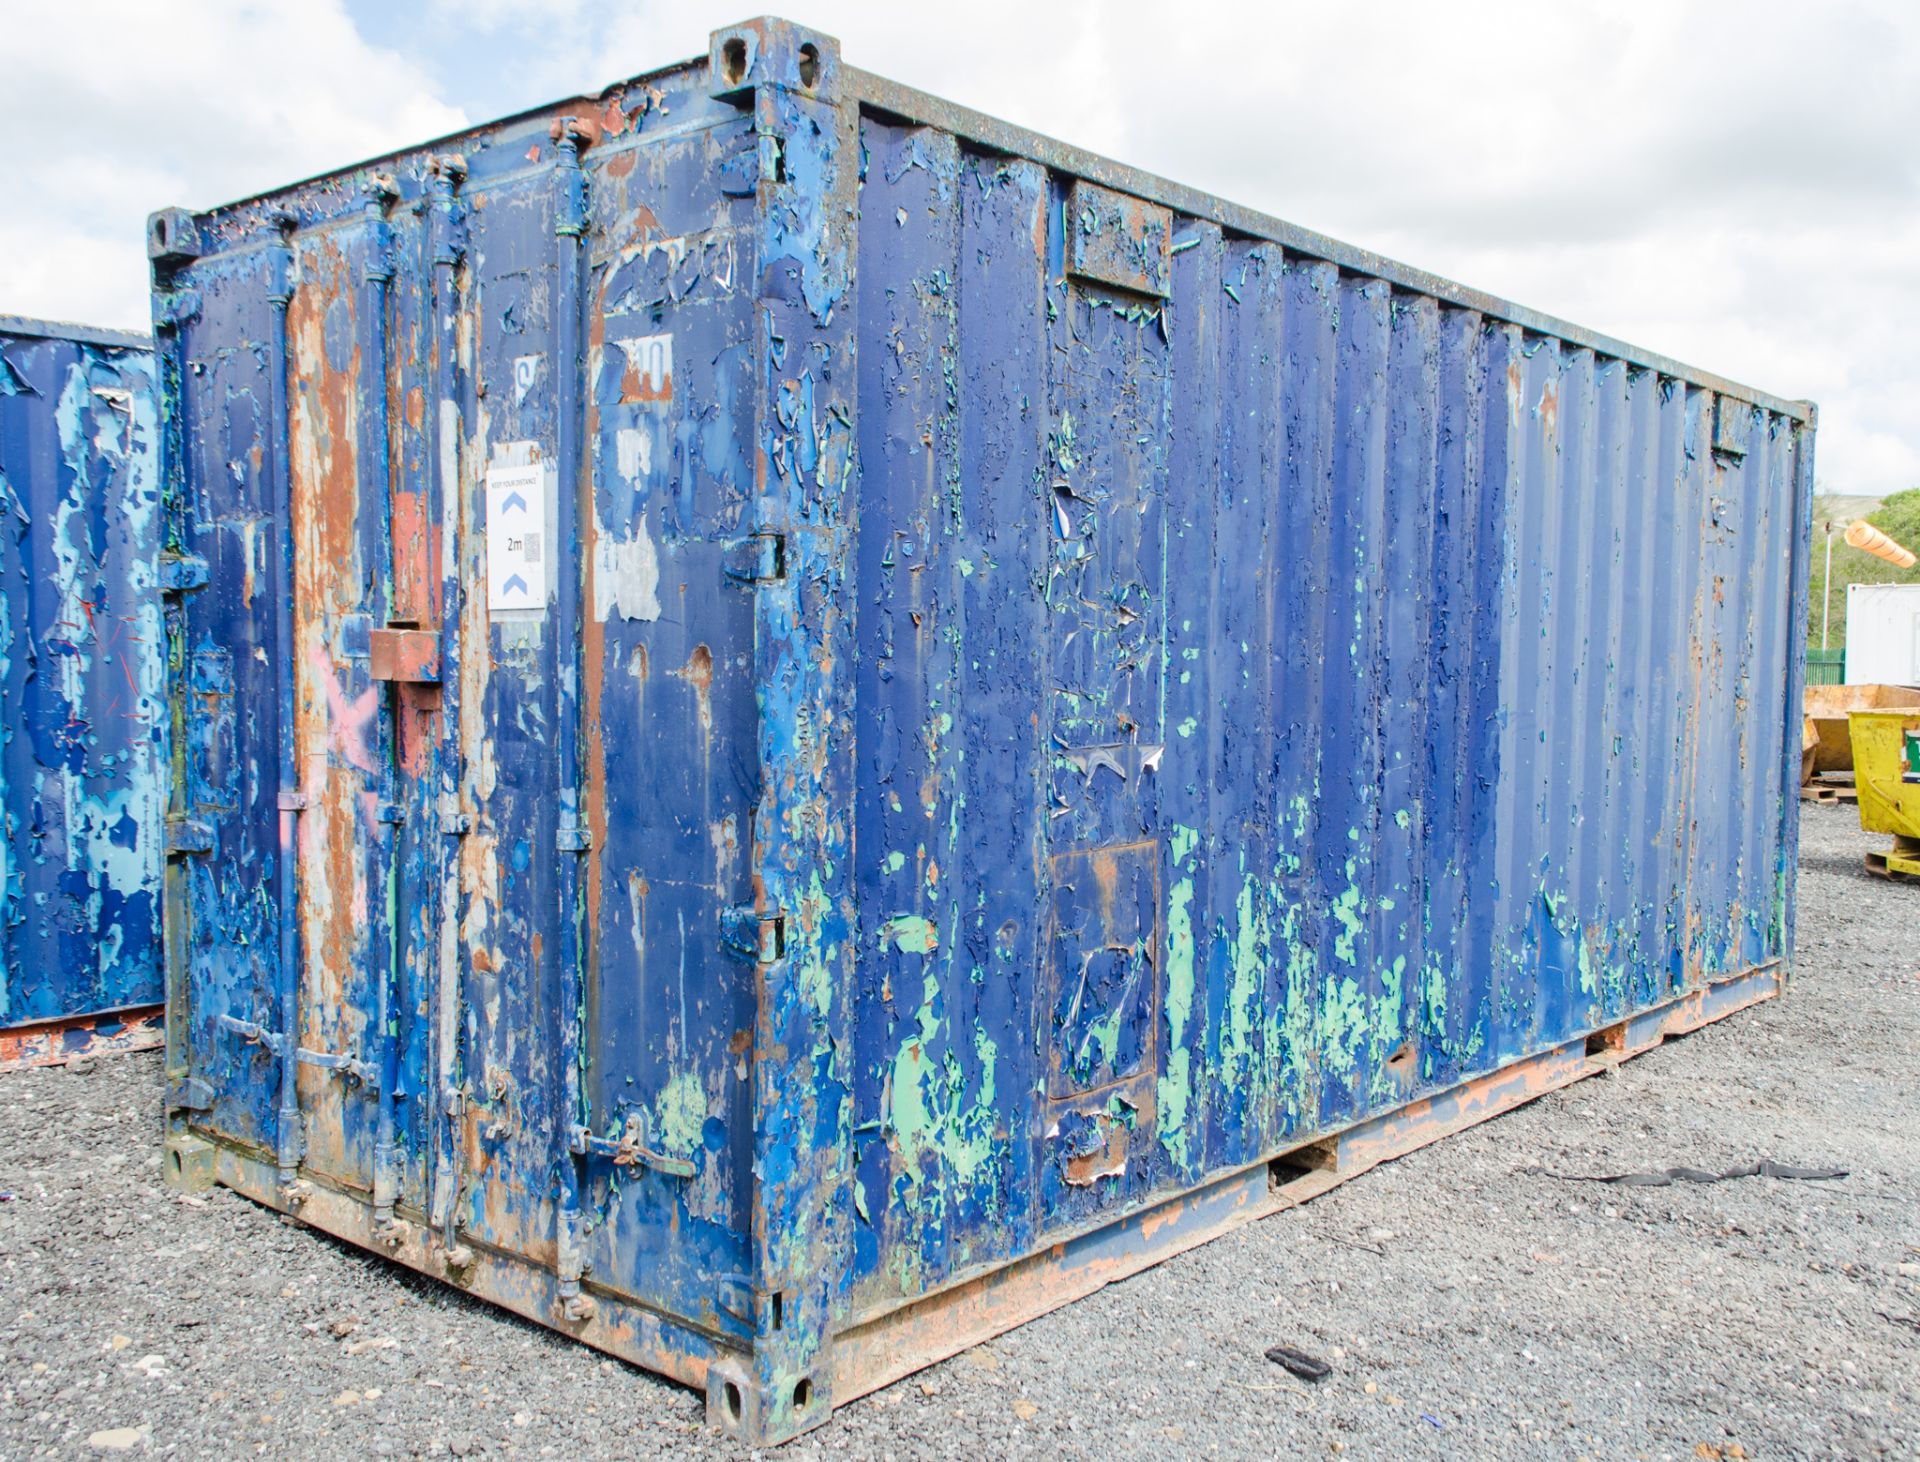 20 ft x 8 ft steel shipping container c/w contents